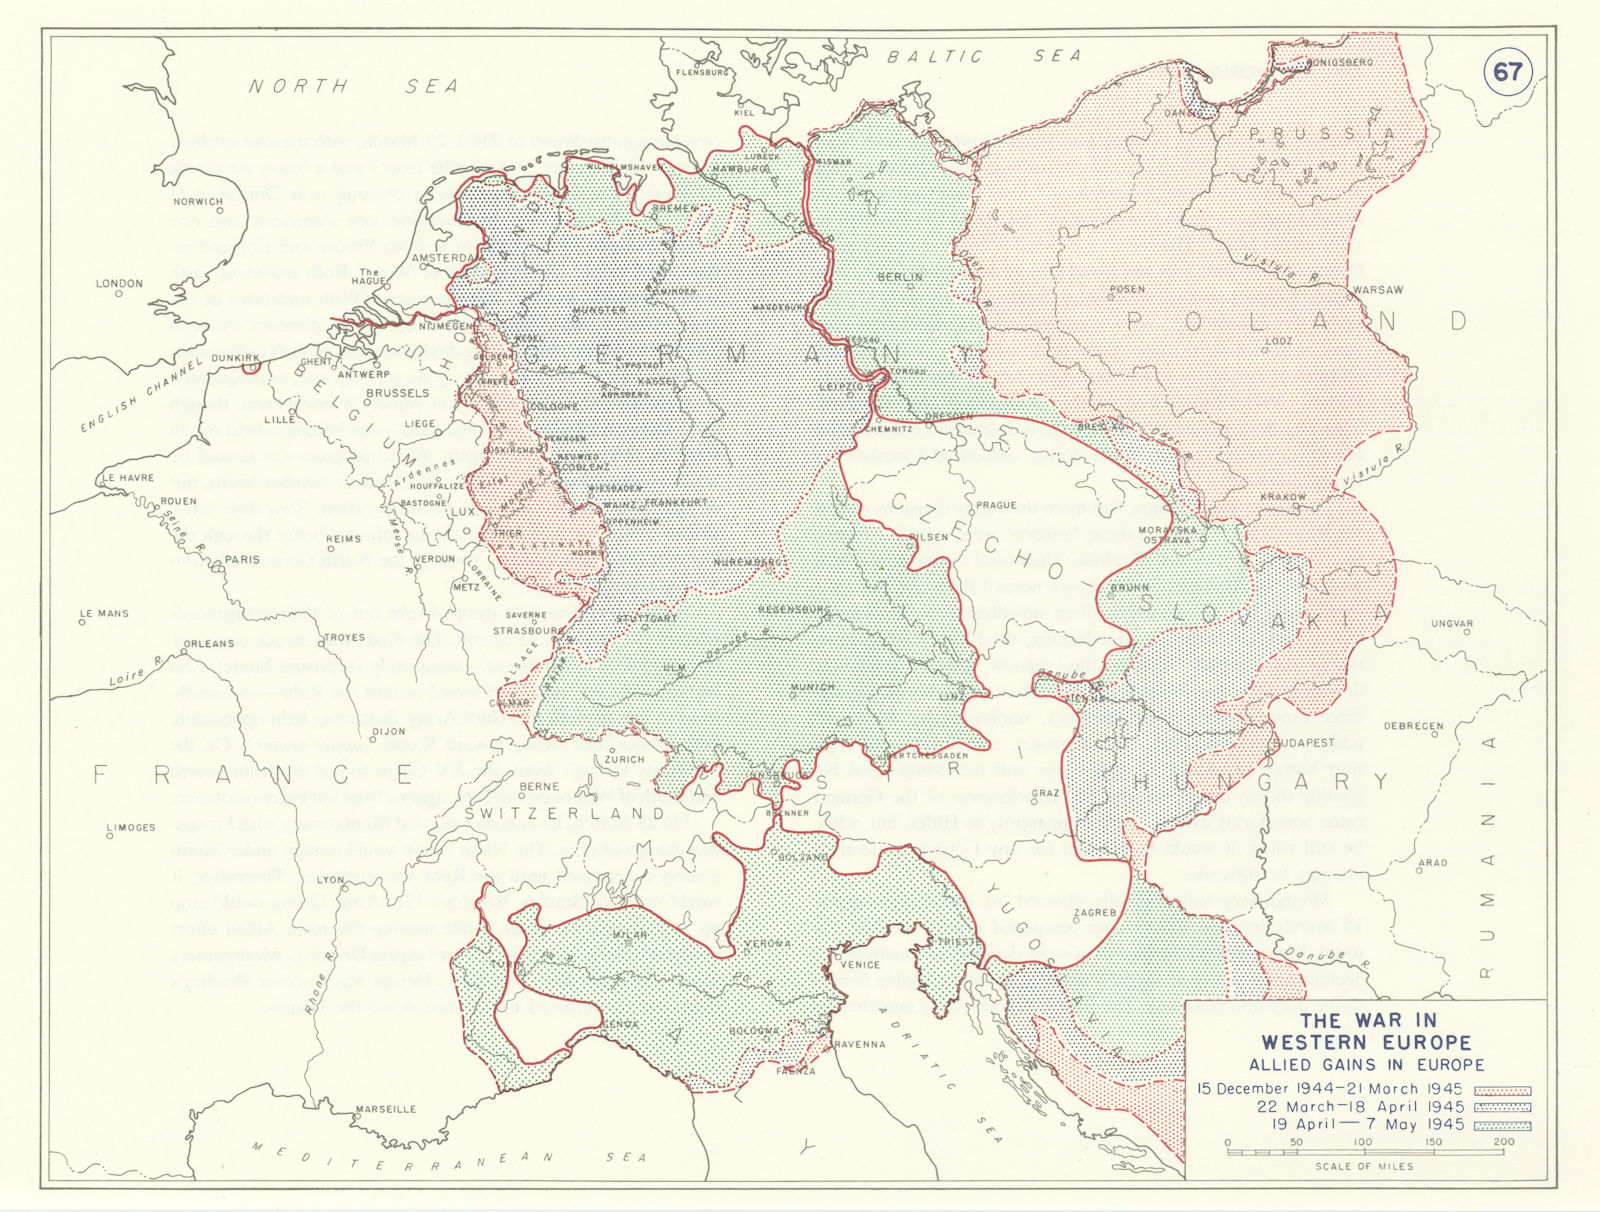 World War 2. 15 December 1944-7 May 1945. Allied Gains in Europe 1959 old map